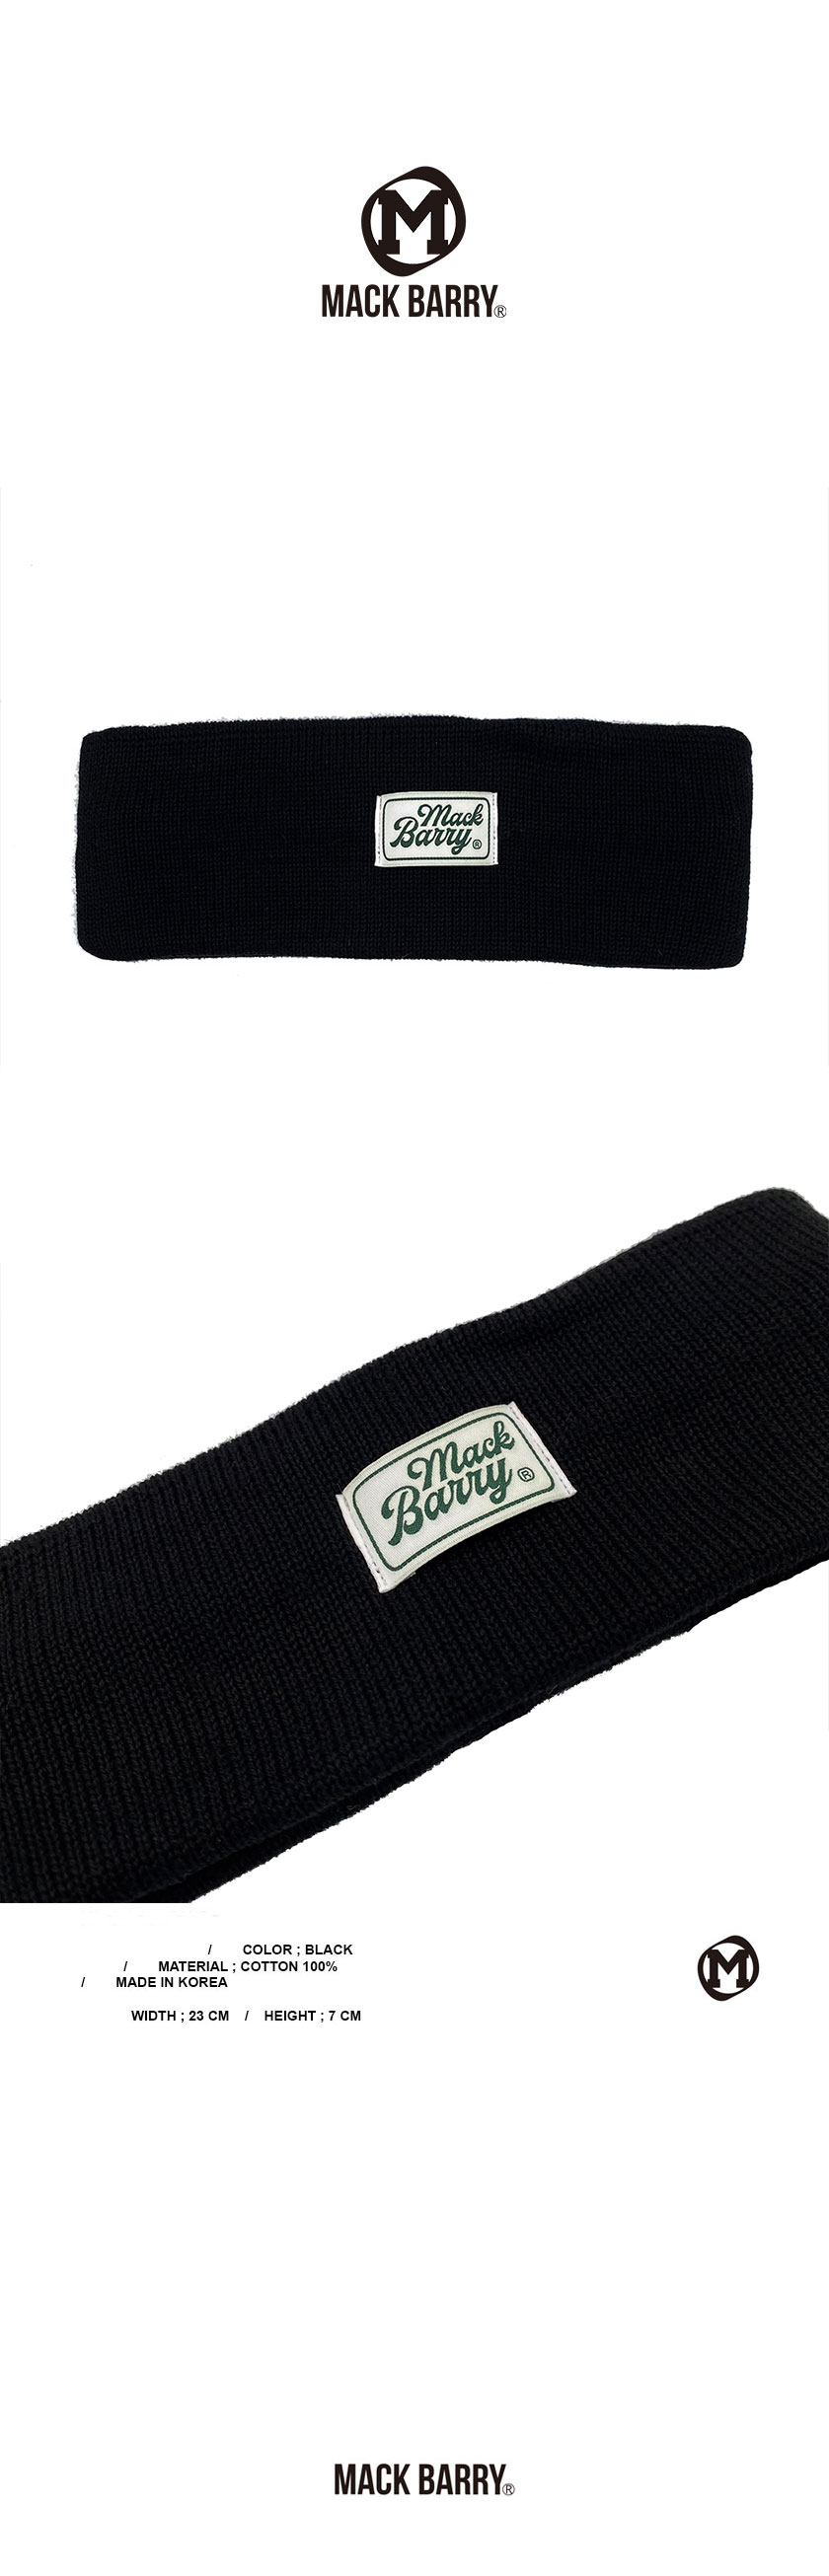 CLASSIC LABEL COTTON HAIR BAND